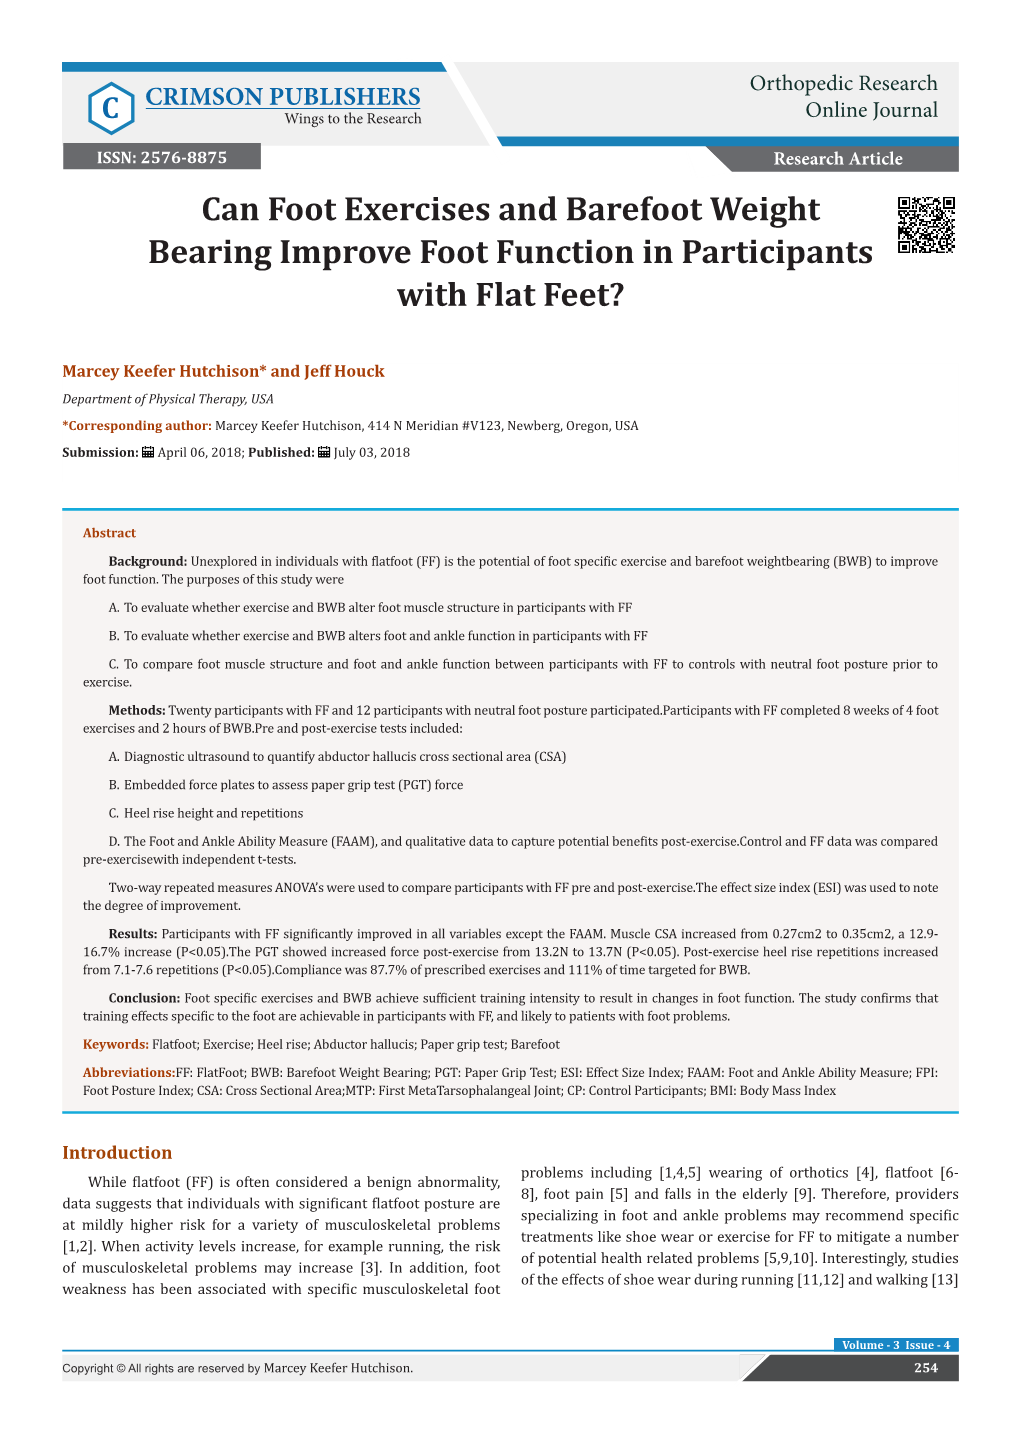 Can Foot Exercises and Barefoot Weight Bearing Improve Foot Function in Participants with Flat Feet?